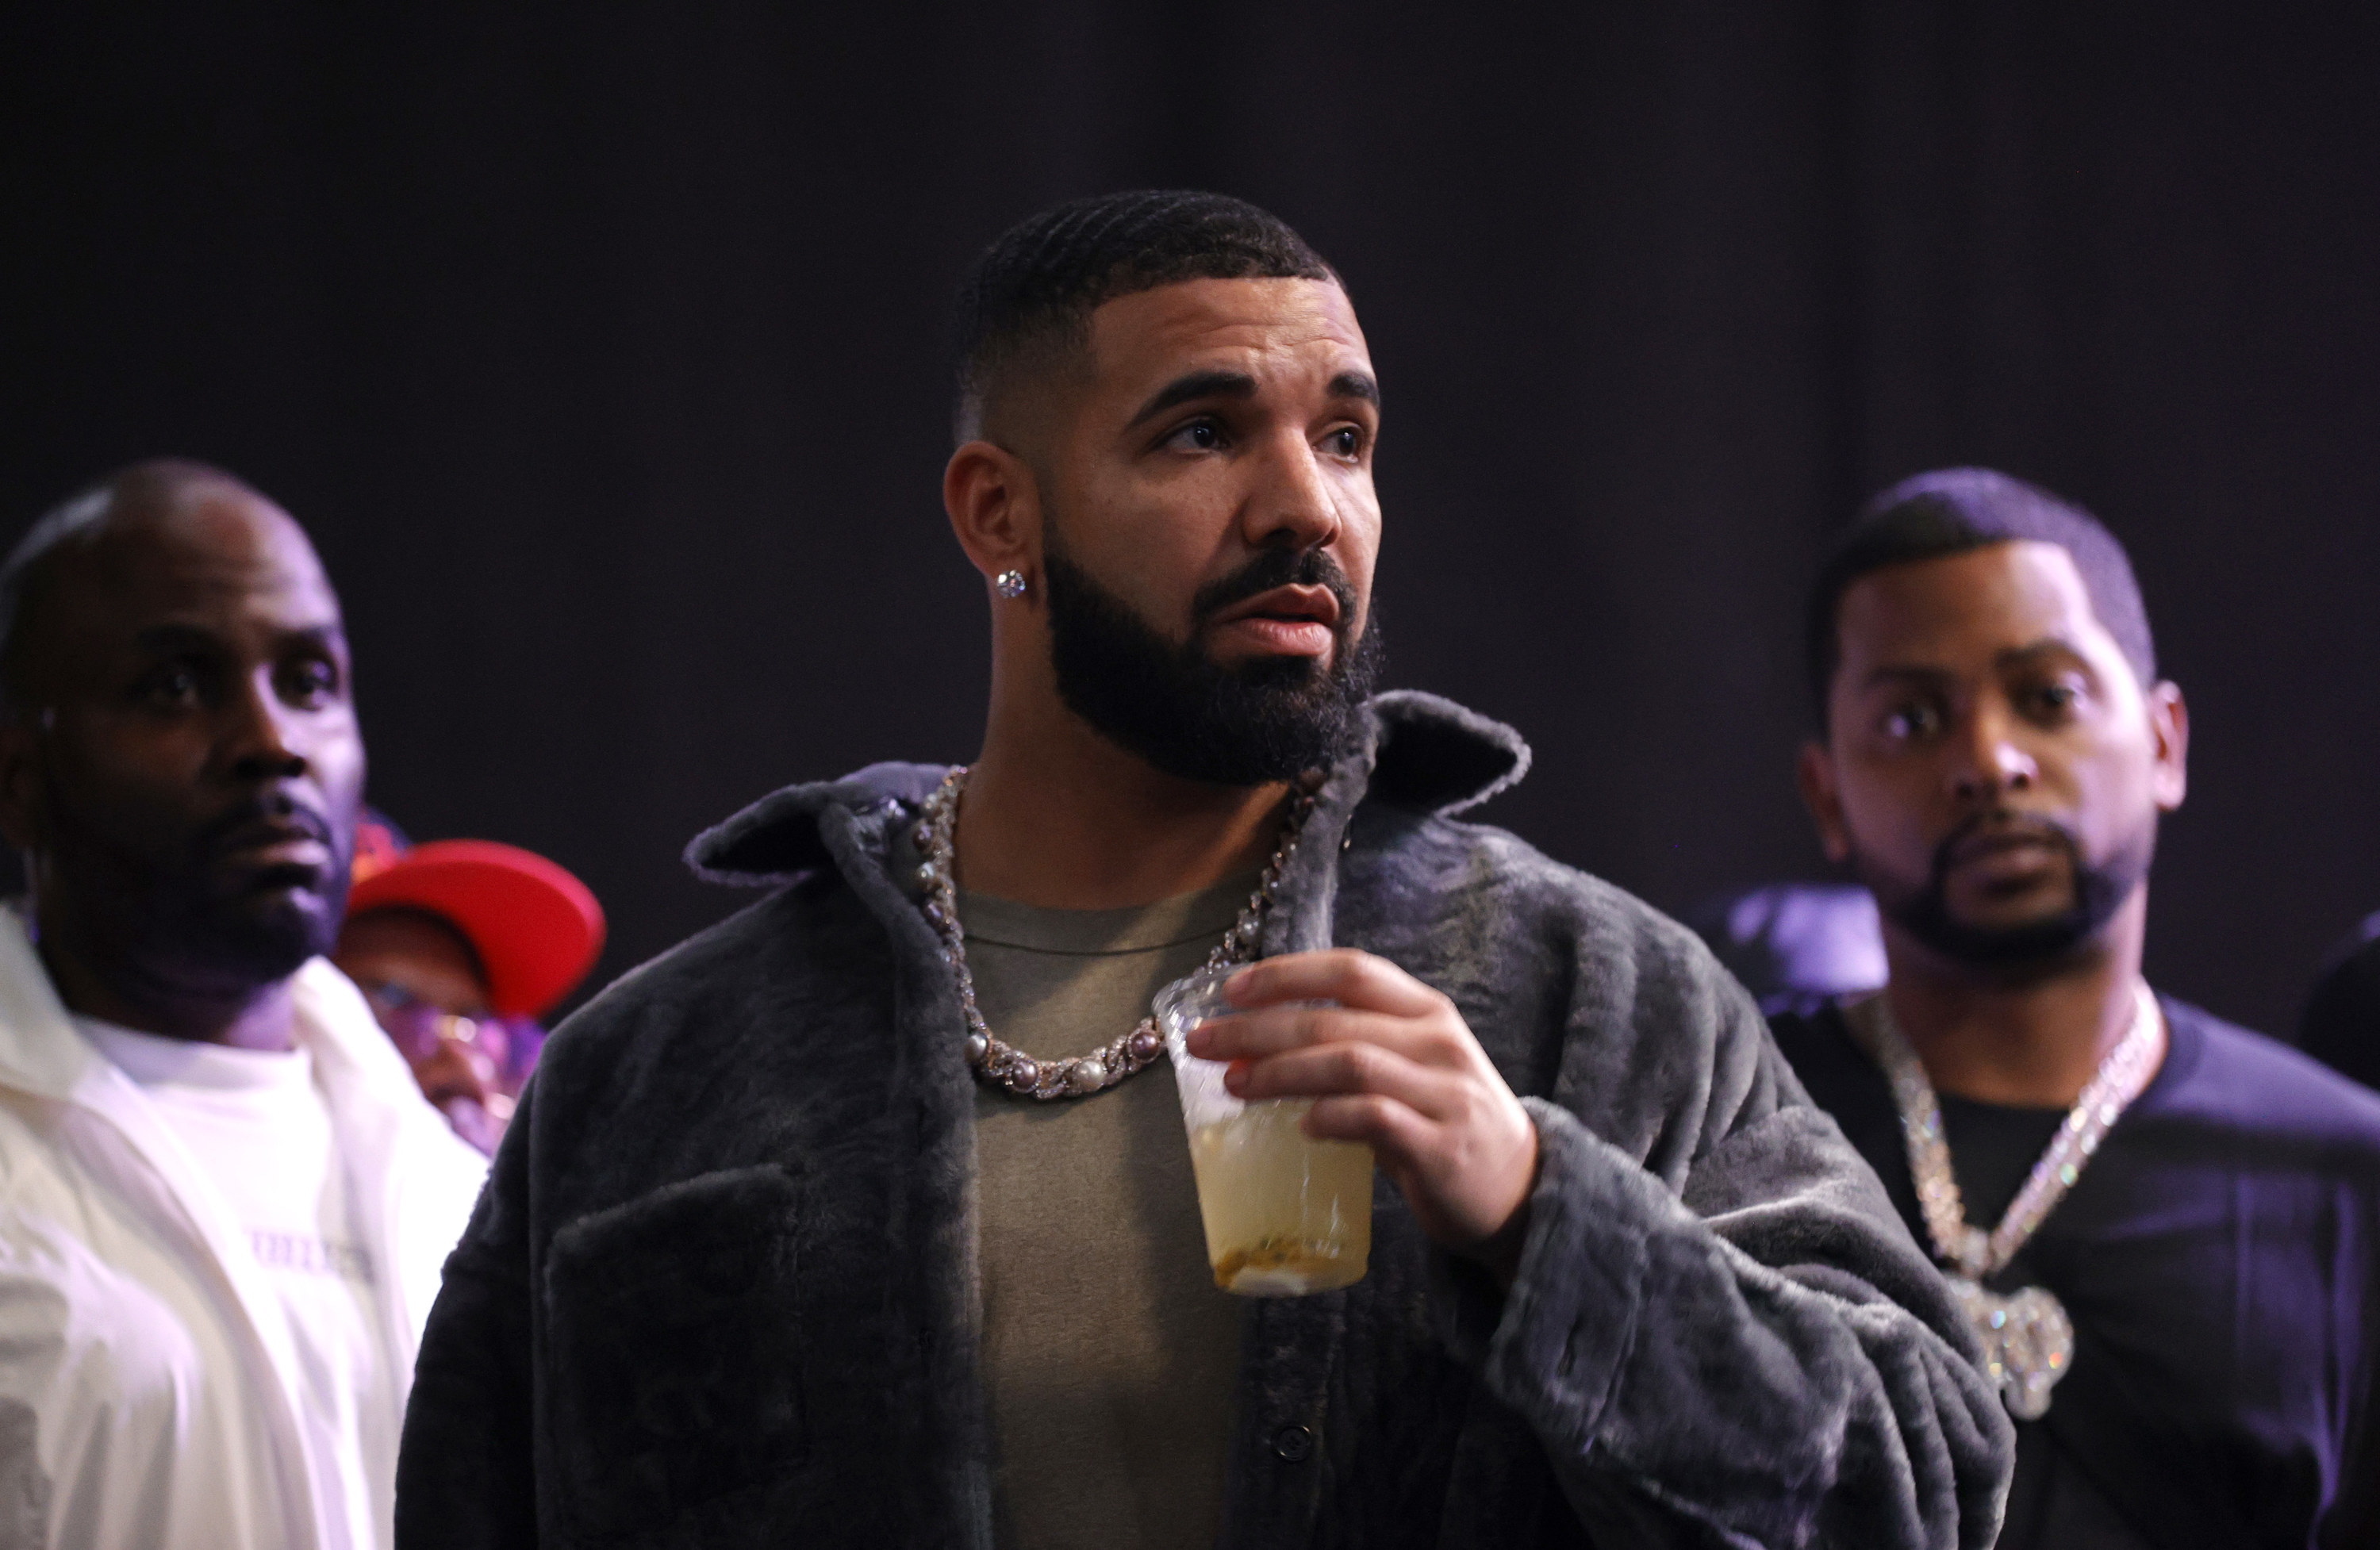 Drake is sipping on a bevvy at a rap battle